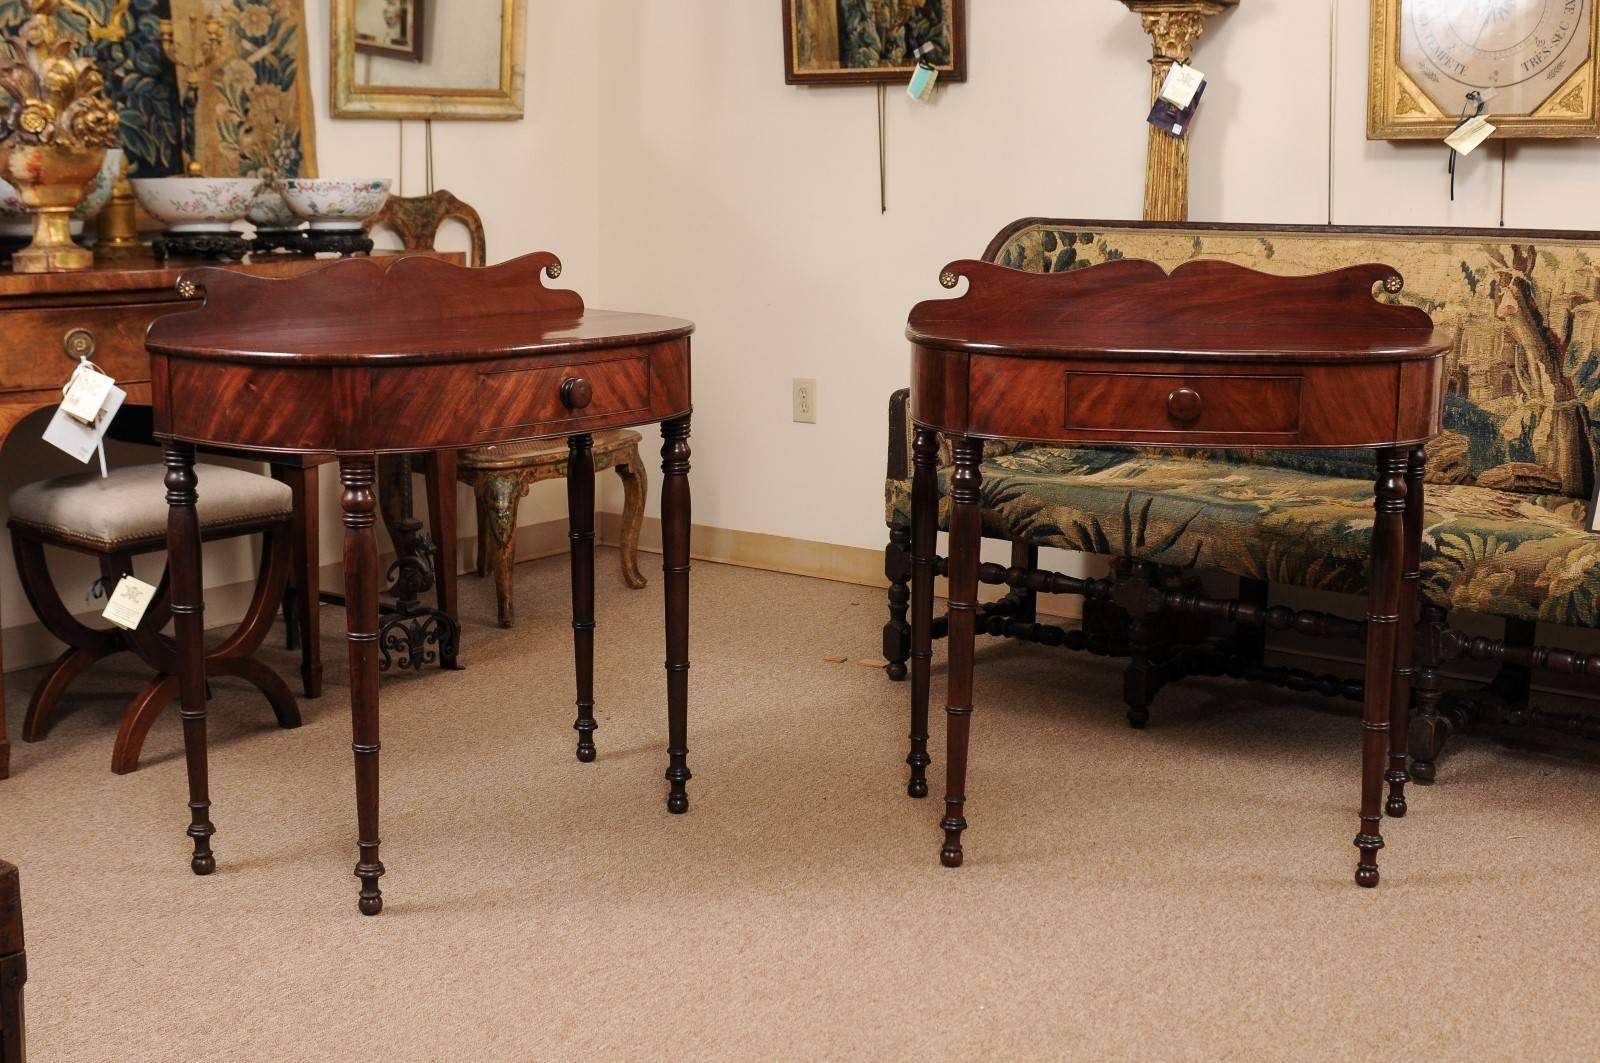 Pair of Federal style, 19th century mahogany console tables with shaped back splash, drawer and turned legs.